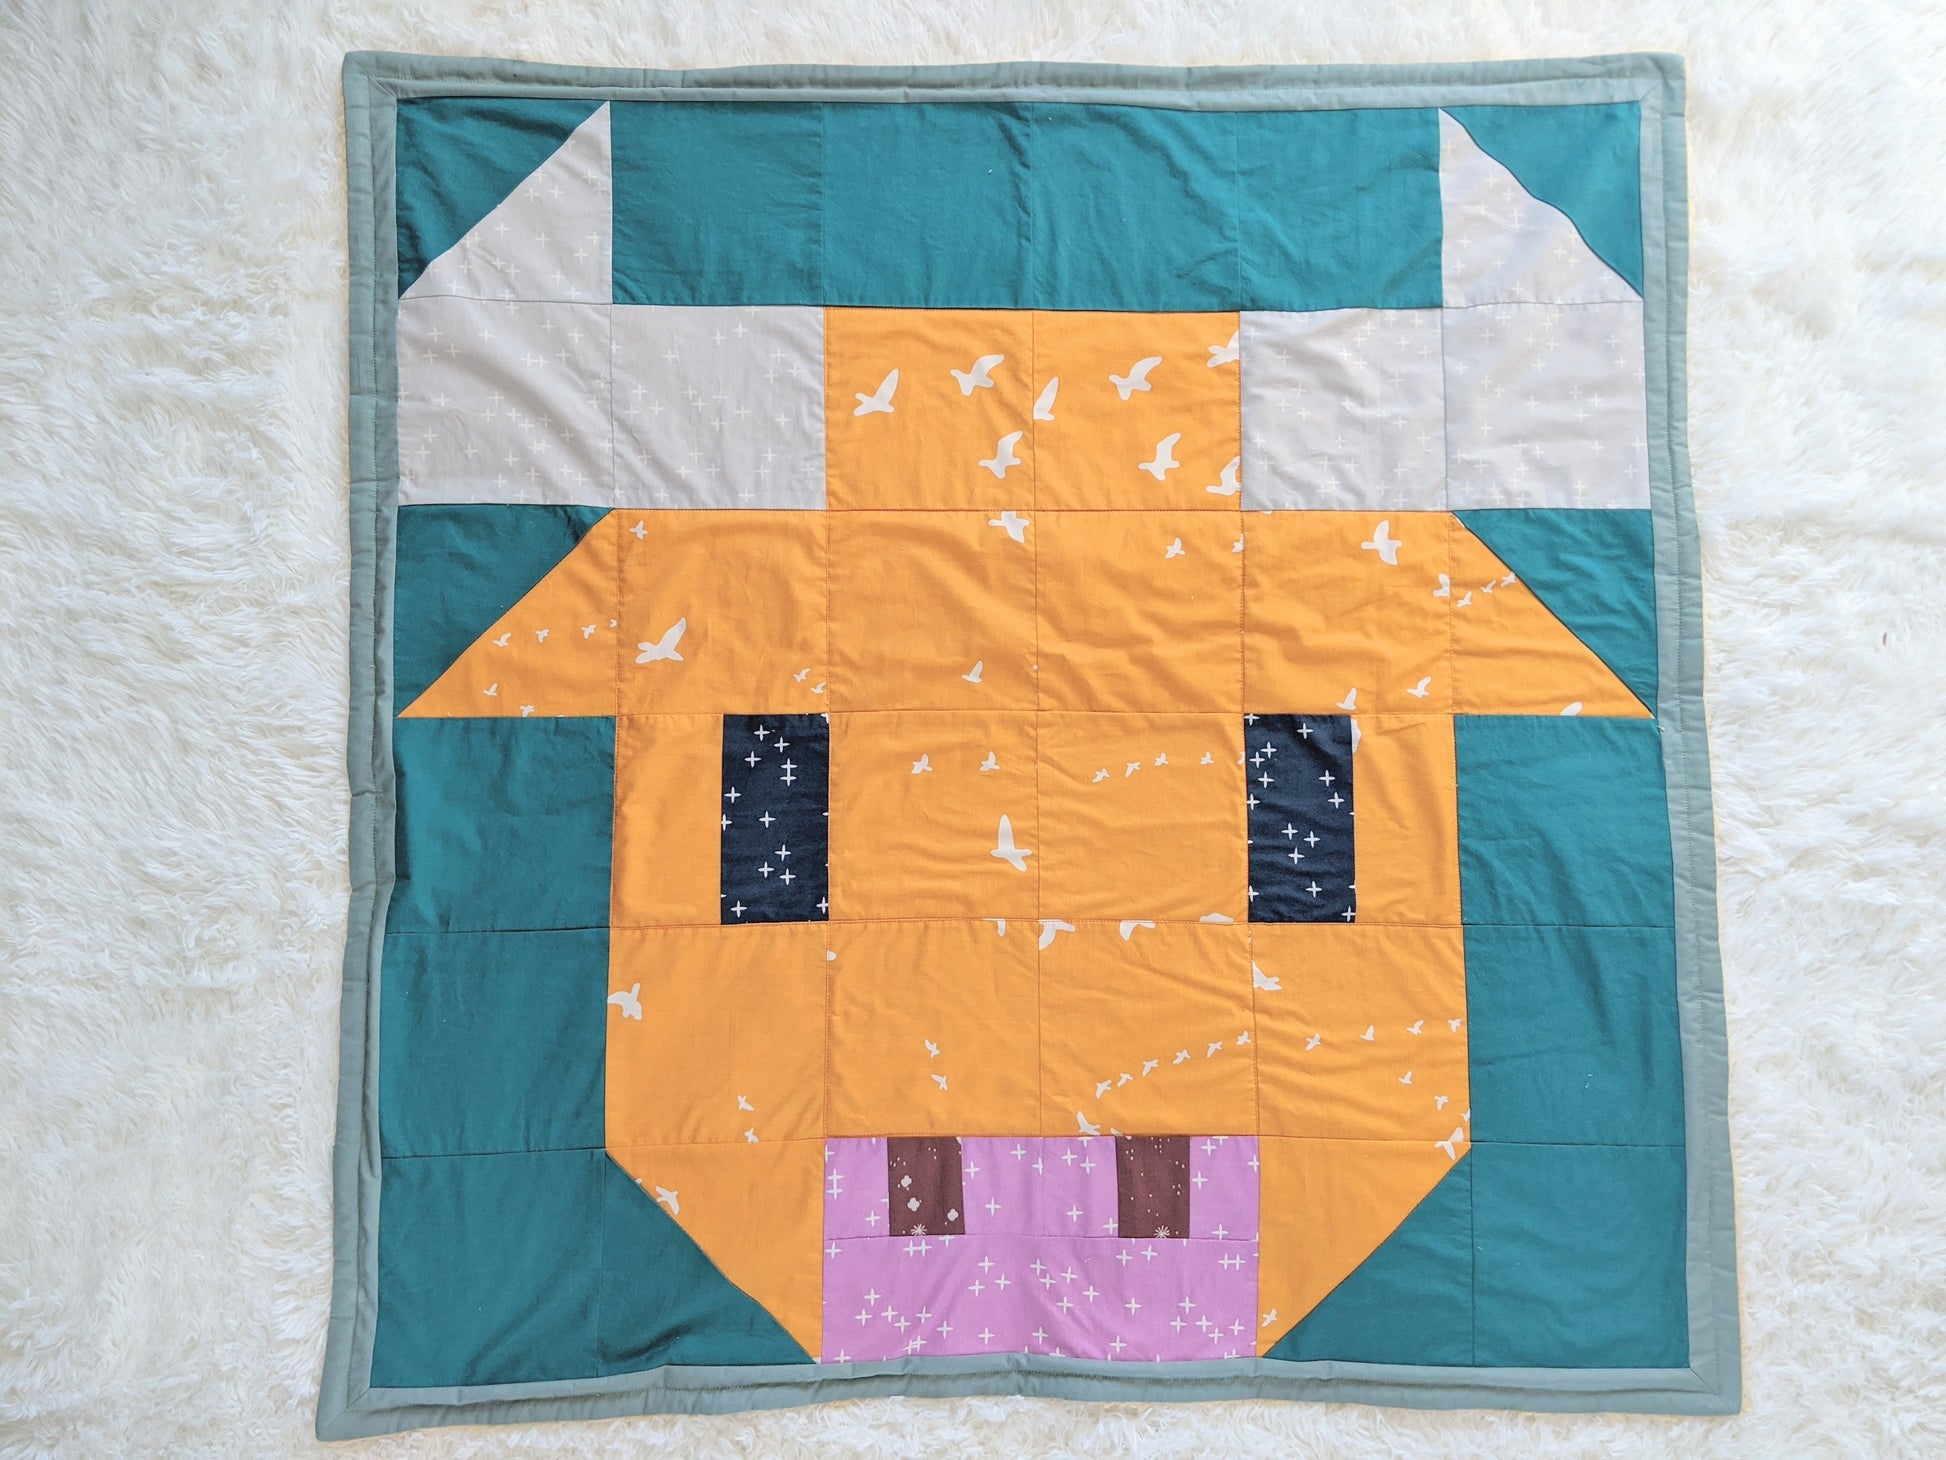 Baby Peipei- 2021: Year of the Ox, backed with Butter Furry Sherpa. An ox quilt pattern made up of square, triangle, and rectangular patches.